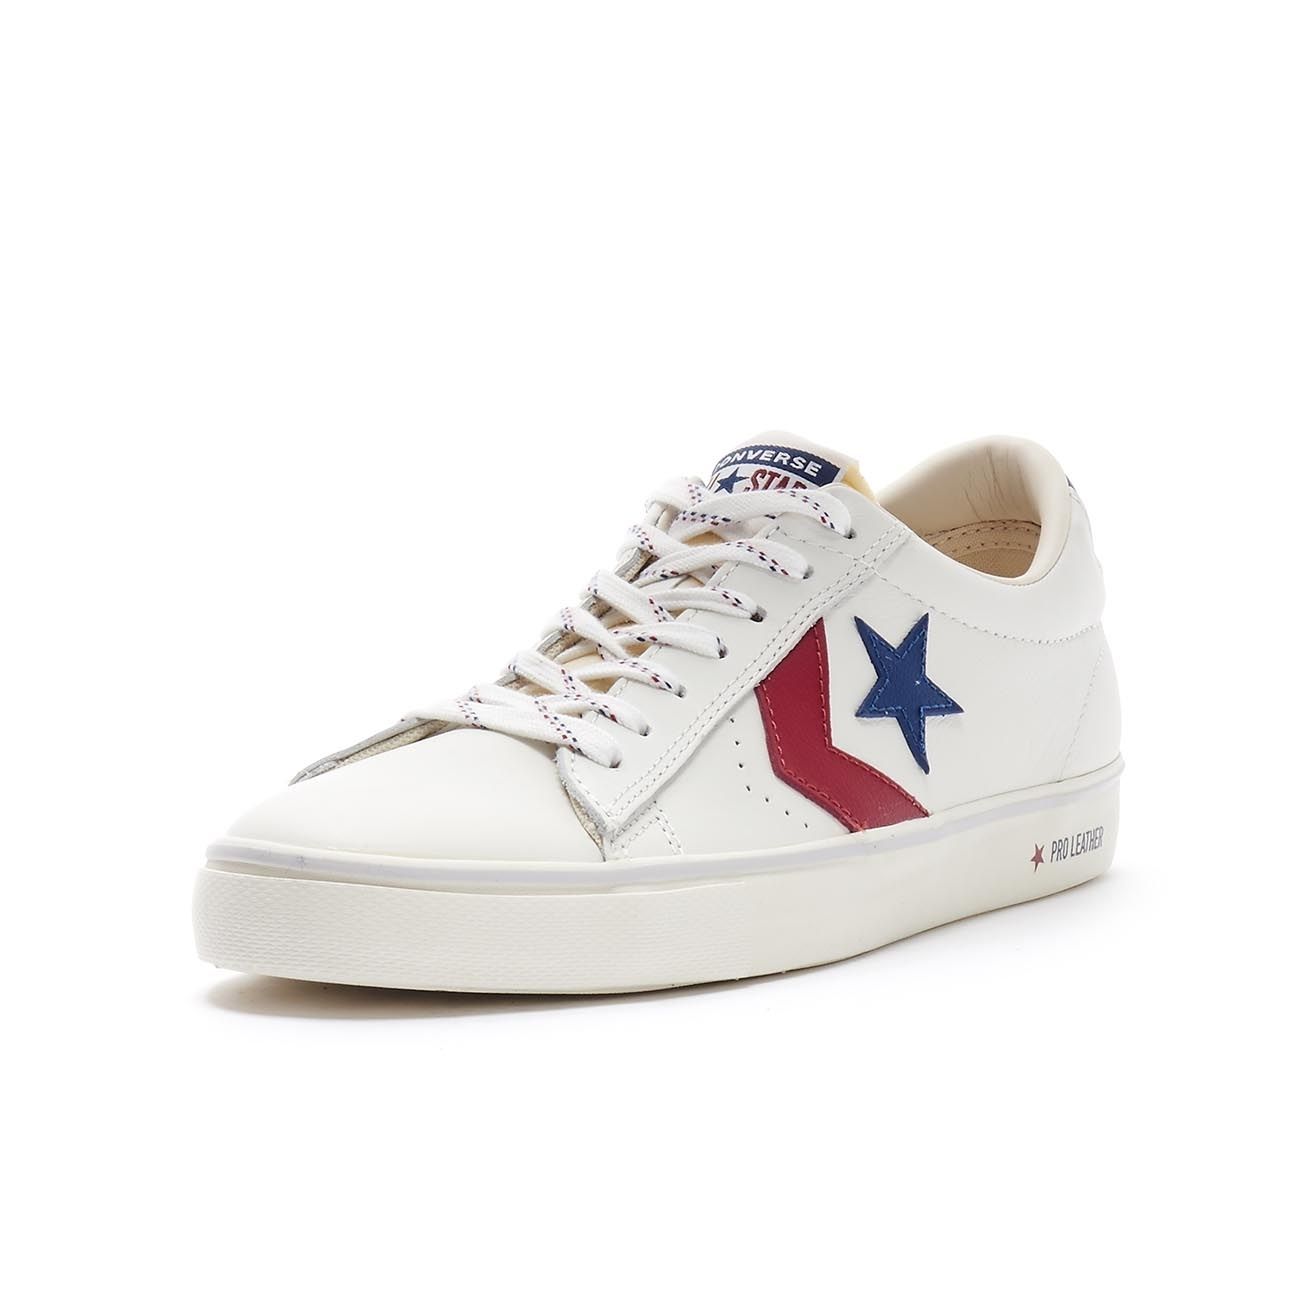 CONVERSE SNEAKERS PRO LEATHER VULC OX Man Vintage white navy ...